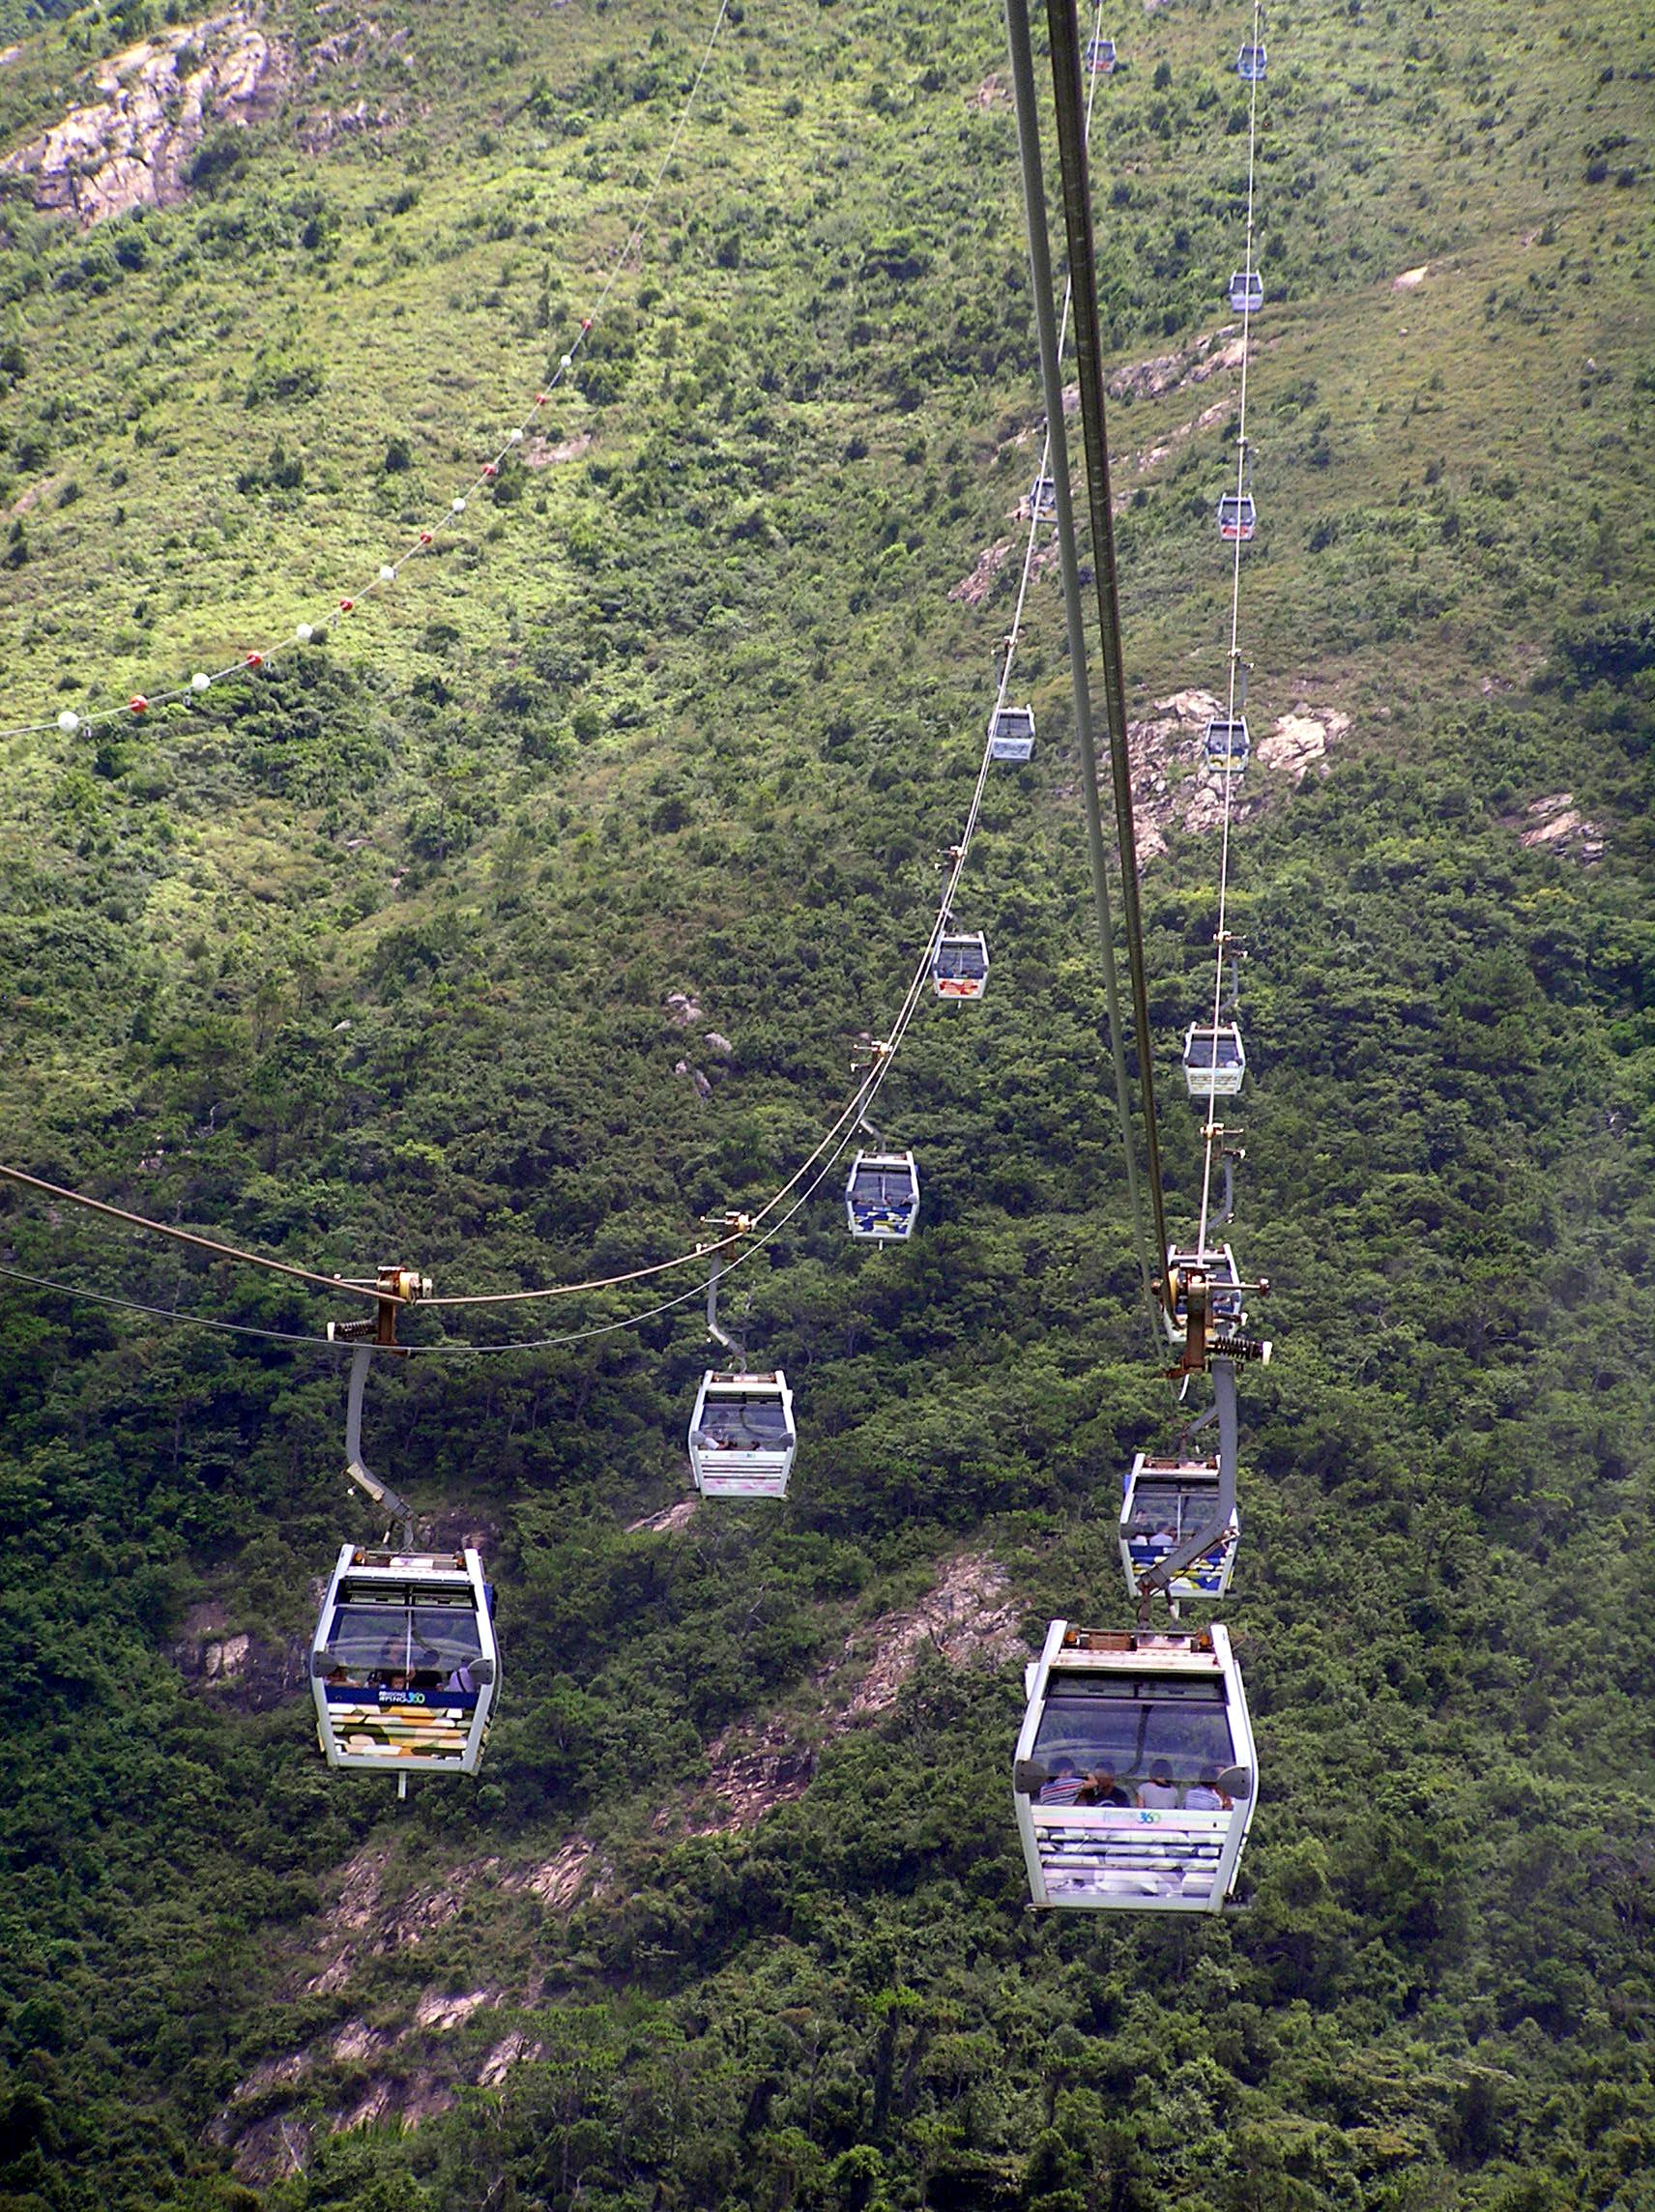 Ngong Ping 360 Has Excellent Views!